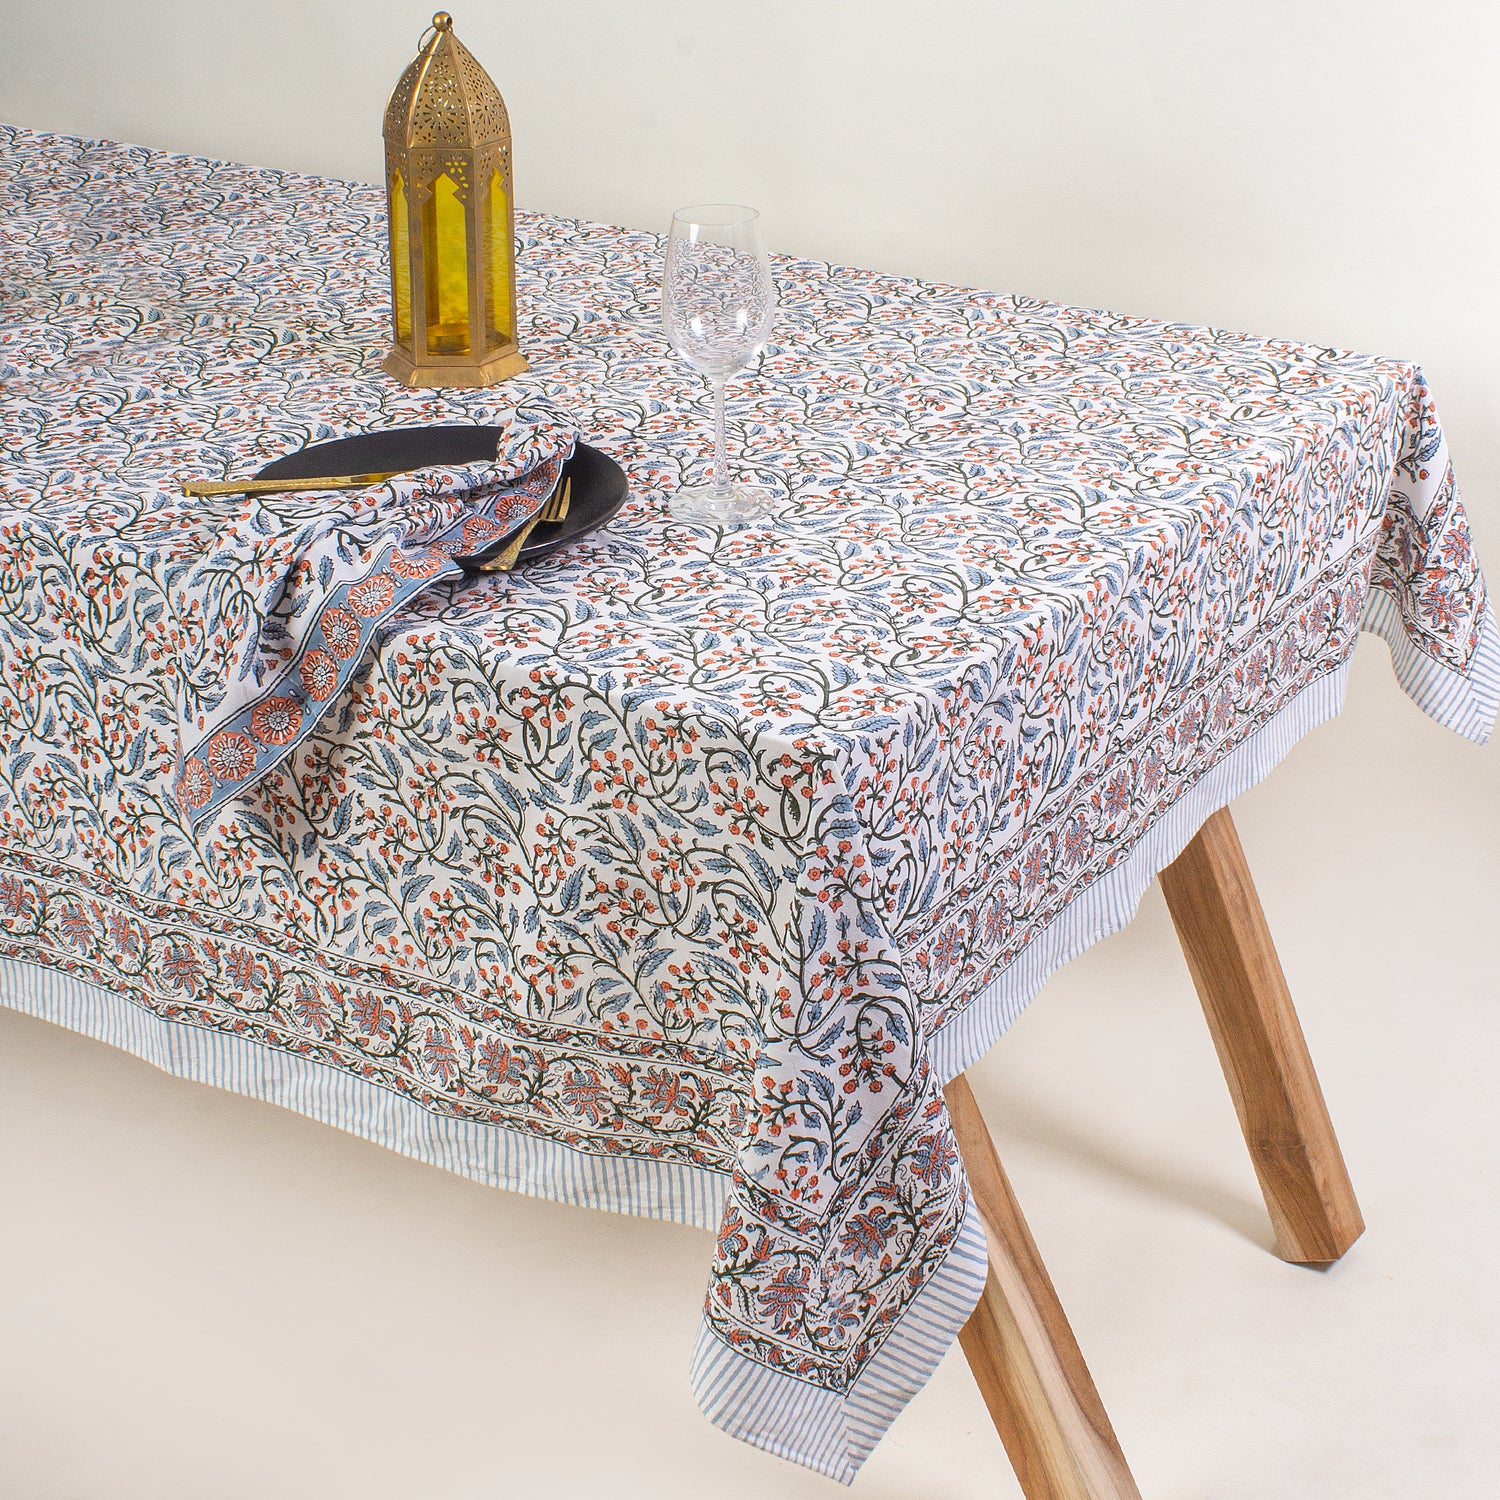 6 Seater Table Cloth in Cotton Table Cloth Online